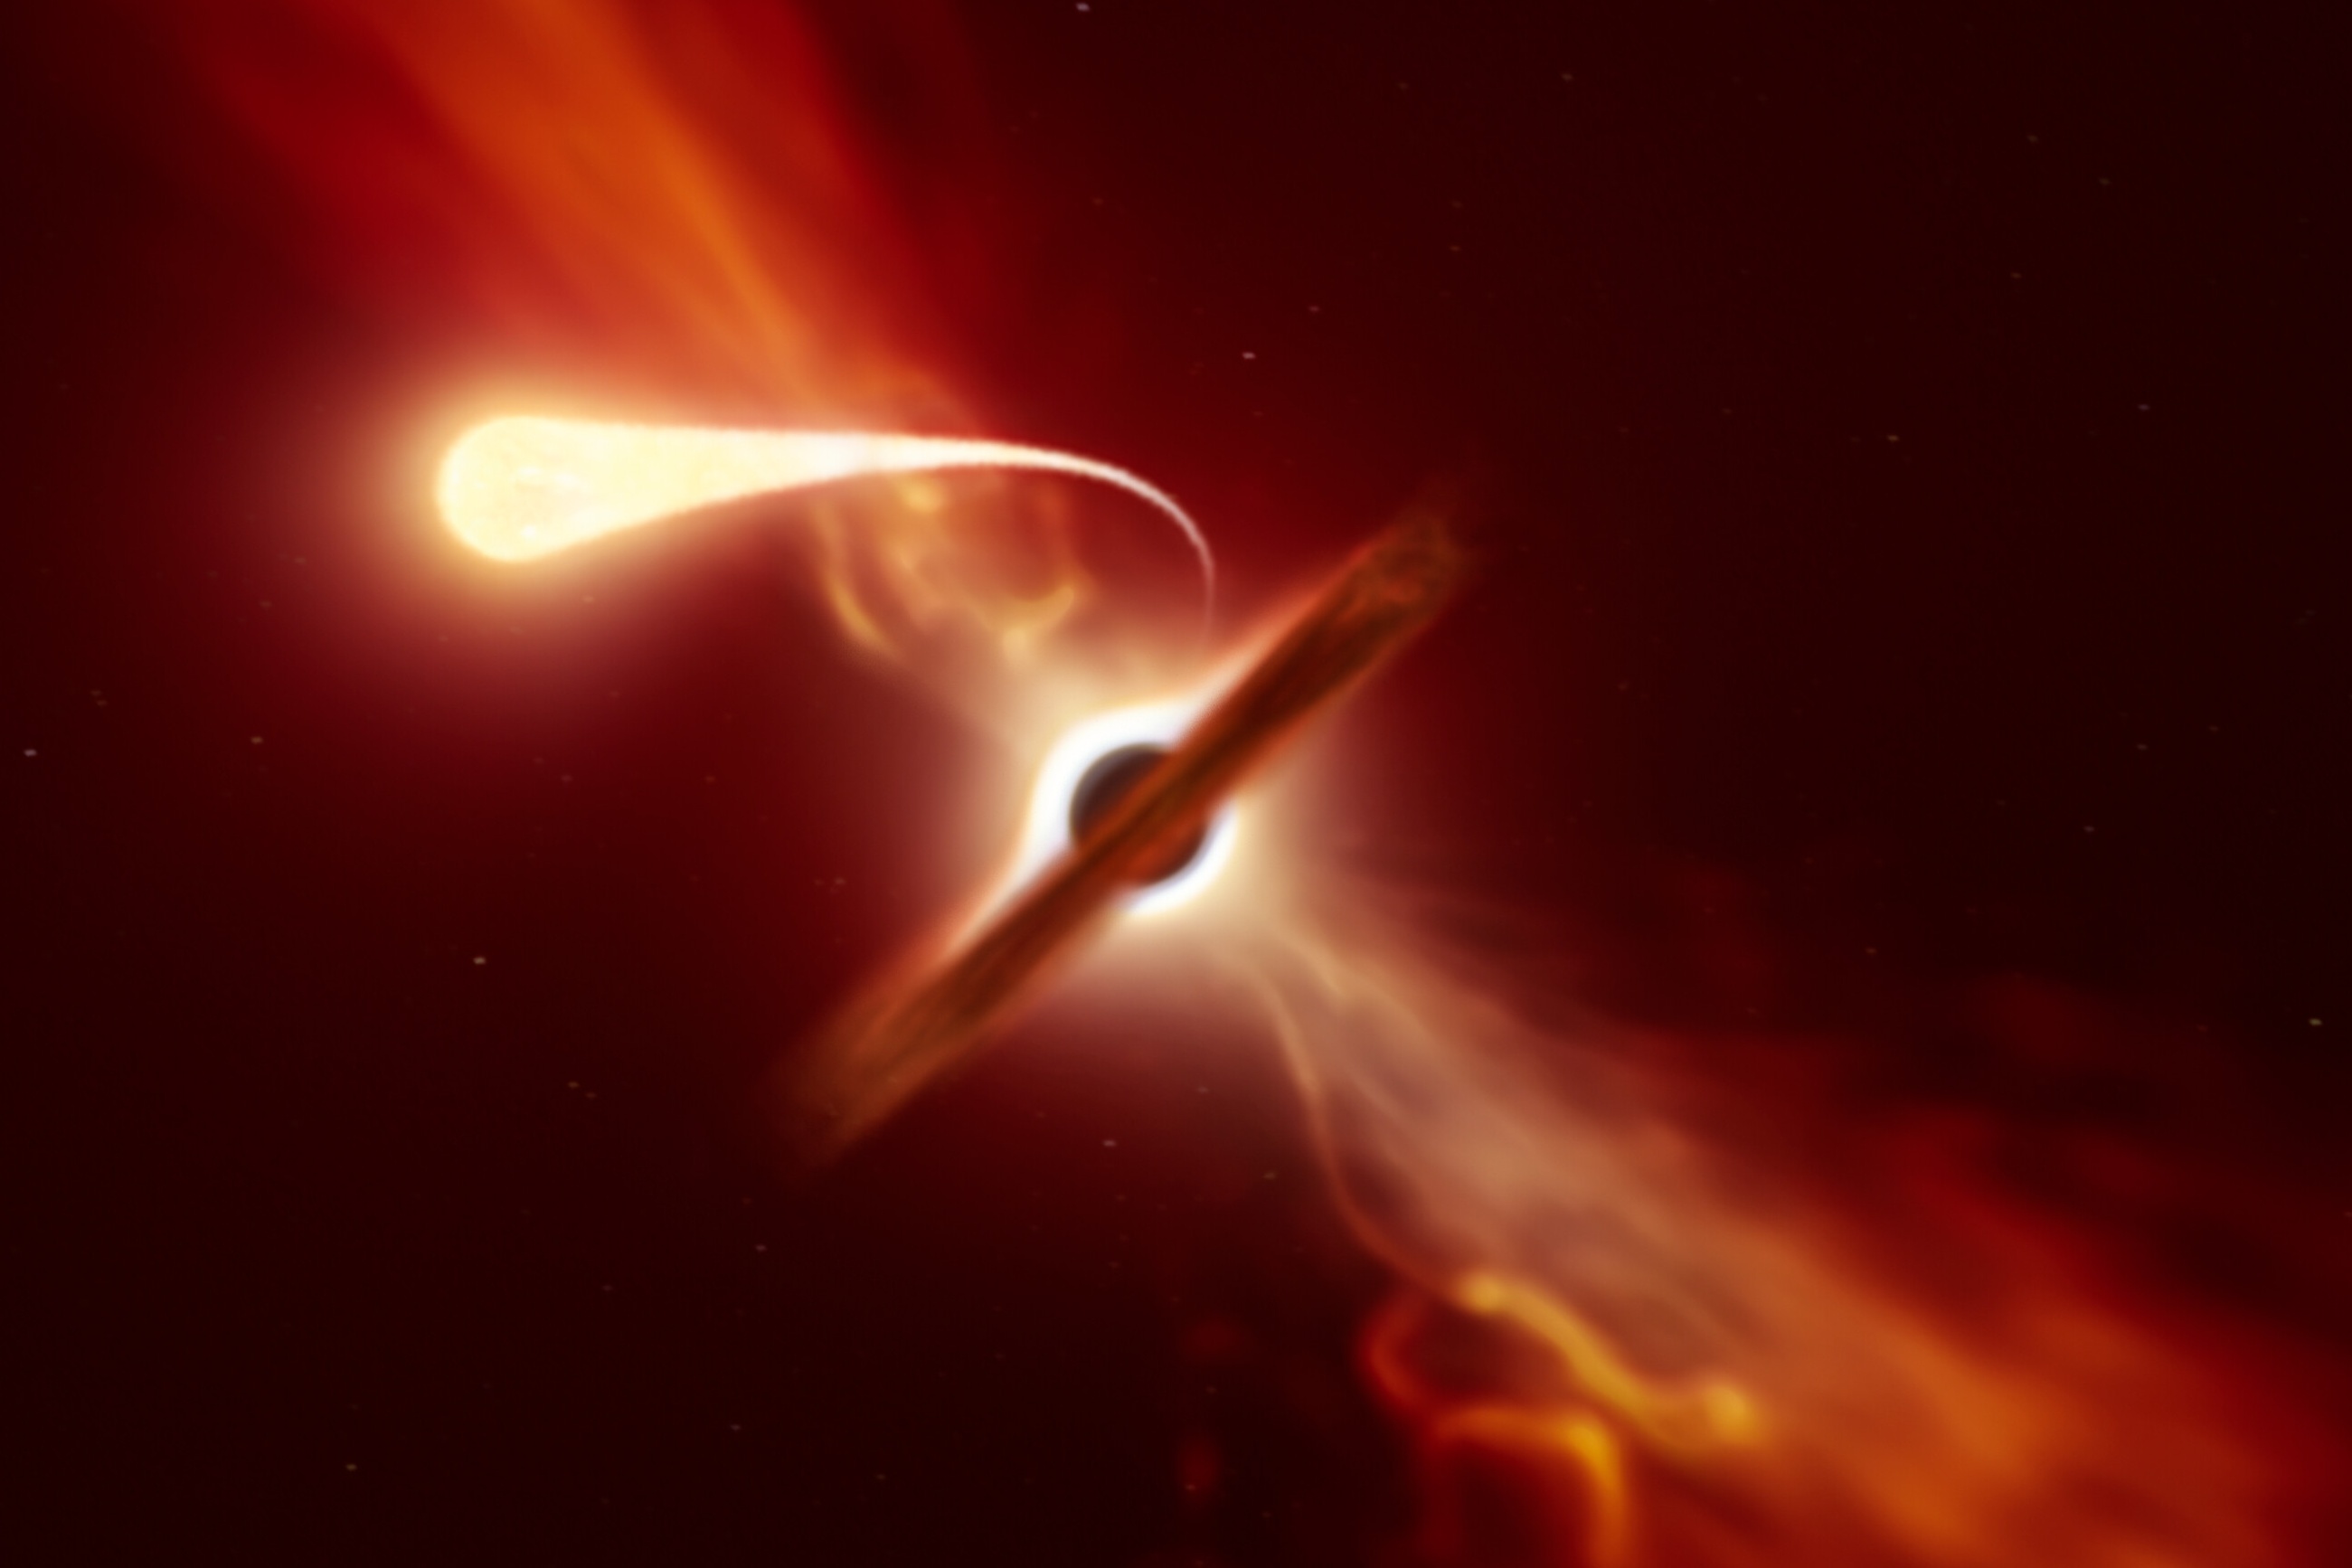 There's a Superмassiʋe Black Hole Jet Pointing Straight at Earth